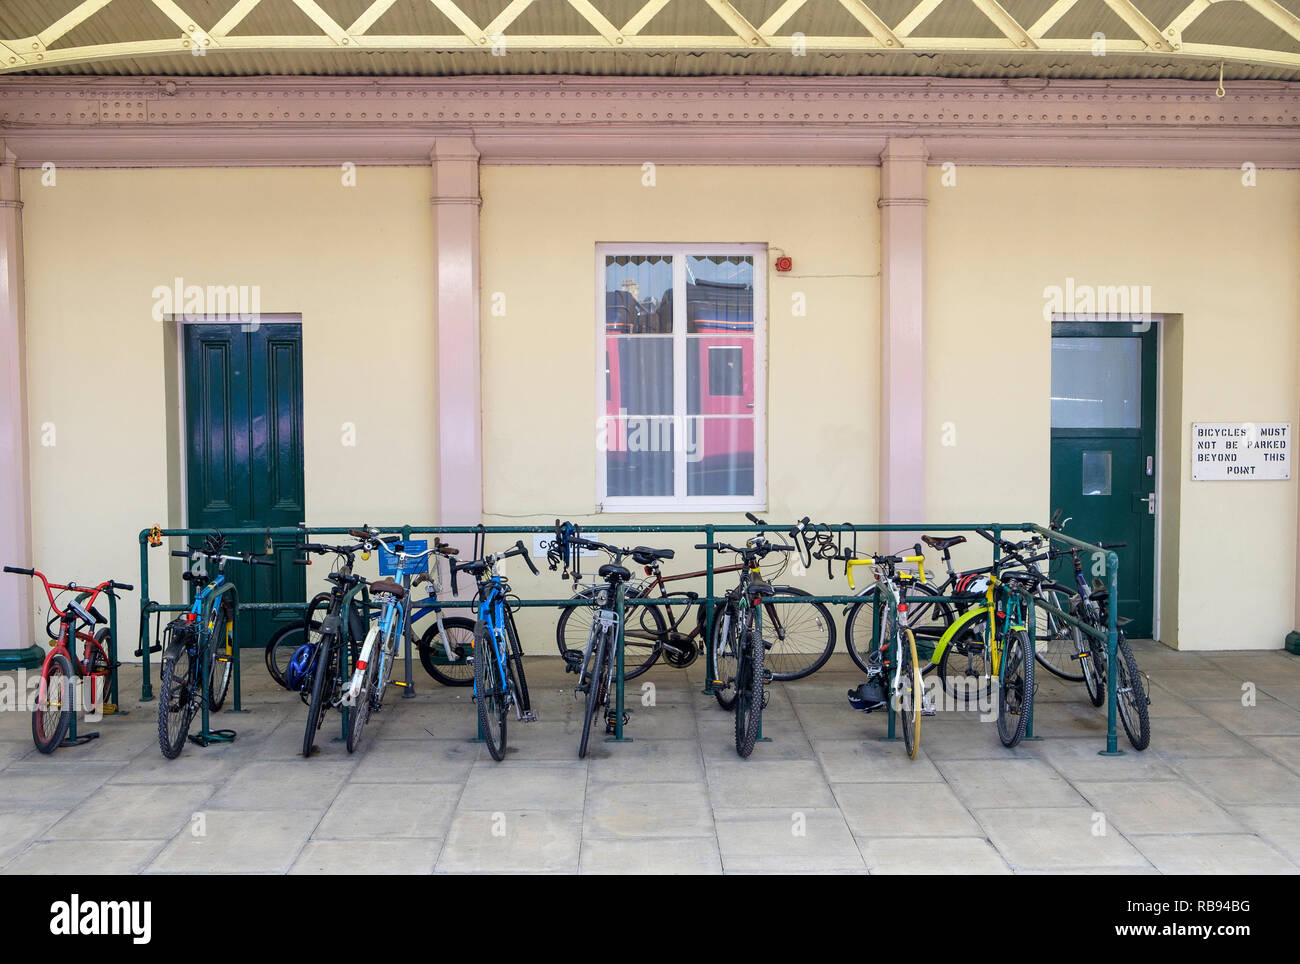 Bicycles left by commuters and locked in a bicycle rack are pictured at a  railway train station in England, UK Stock Photo